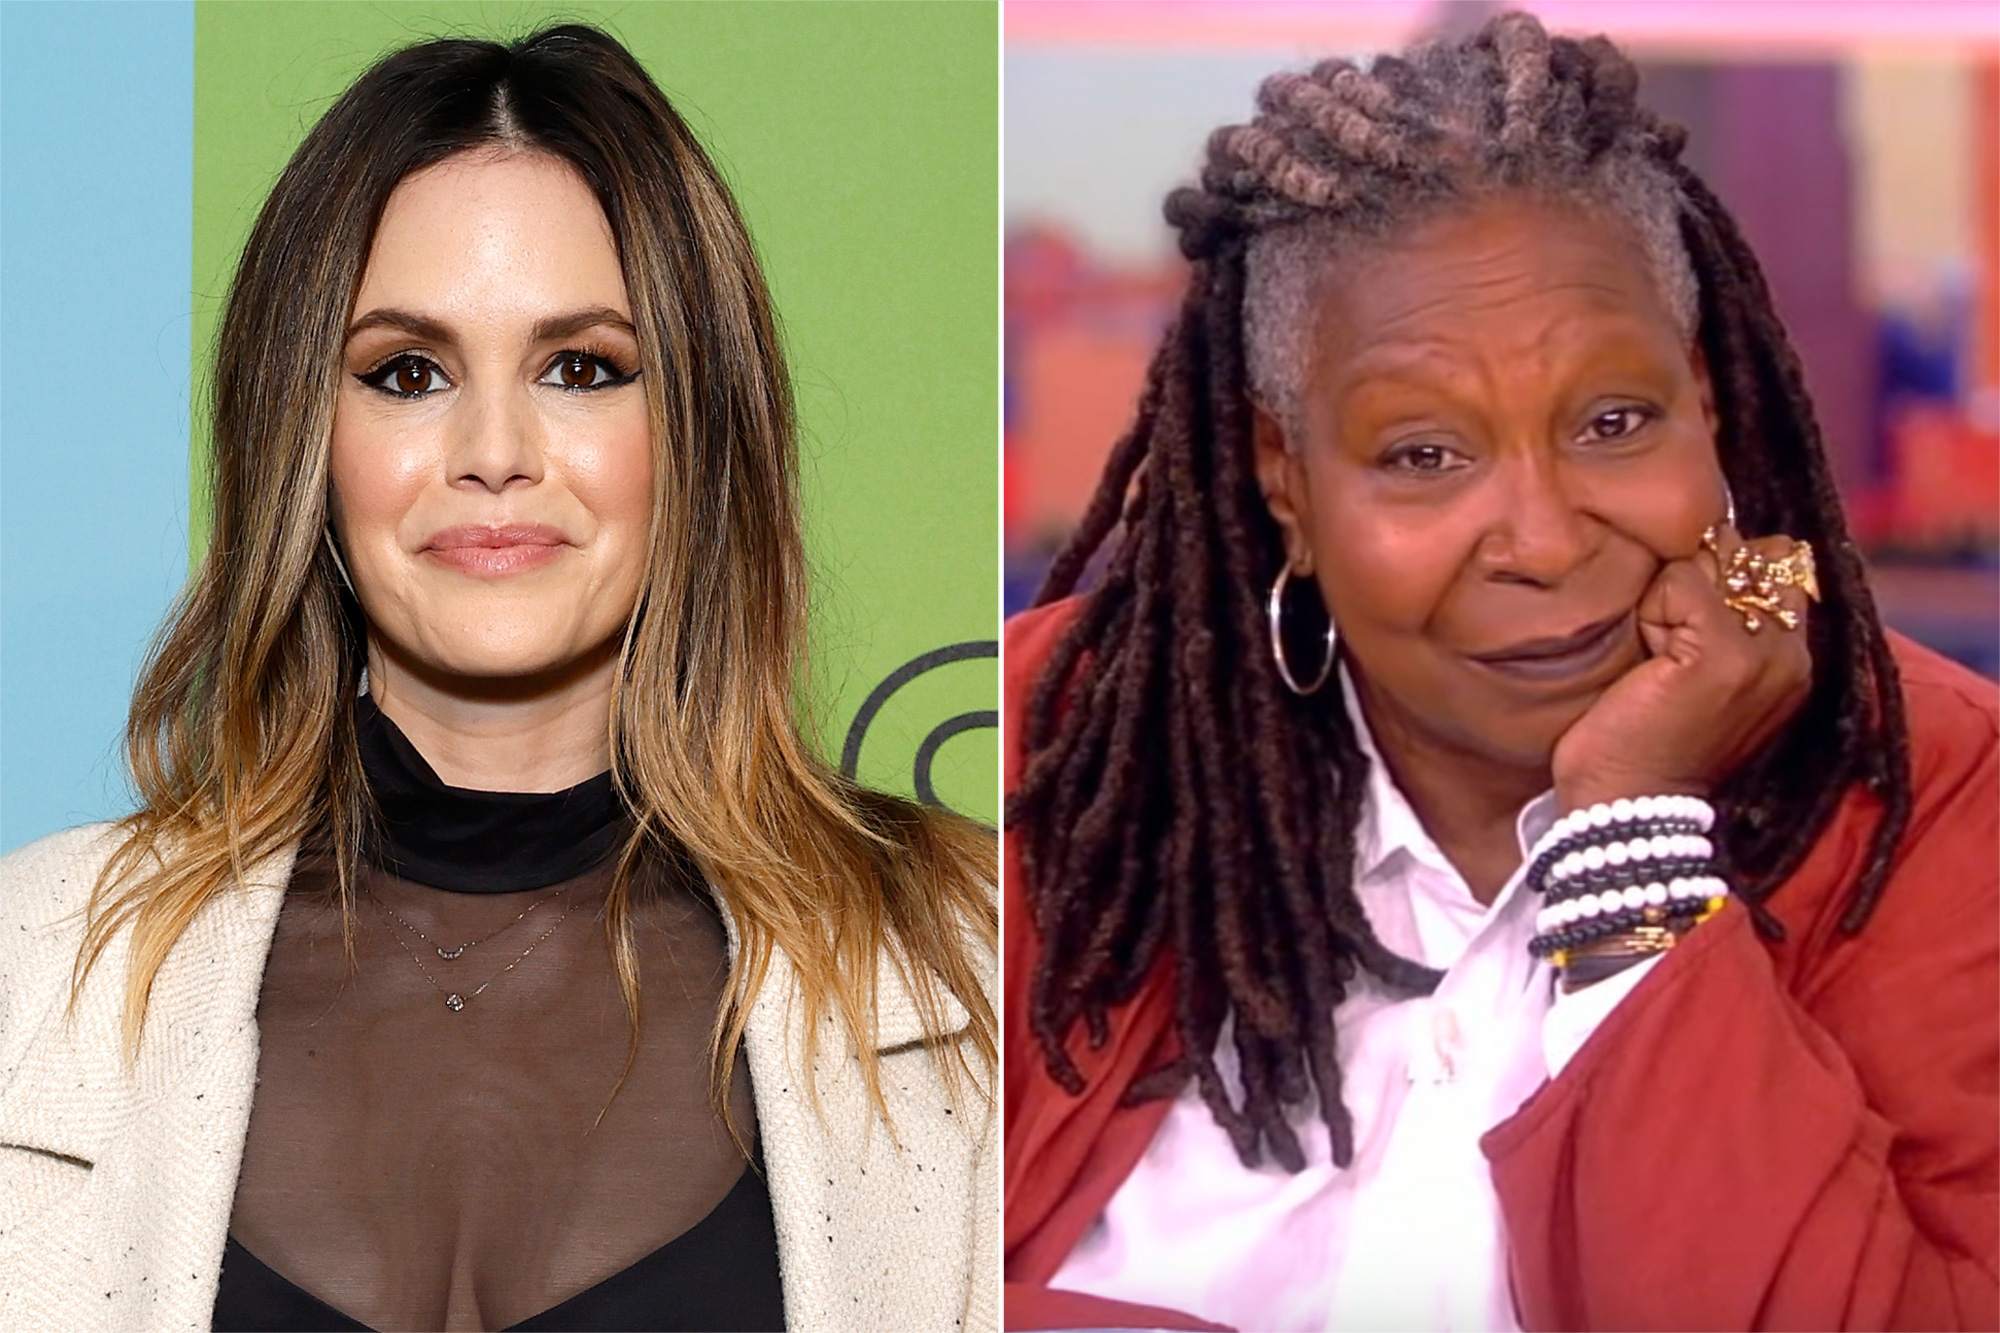 Rachel Bilson Responded After Whoopi Goldberg Criticized Her For Finding Men With A ‘Low’ Number Of Sexual Partners ‘Weird’ [Video]